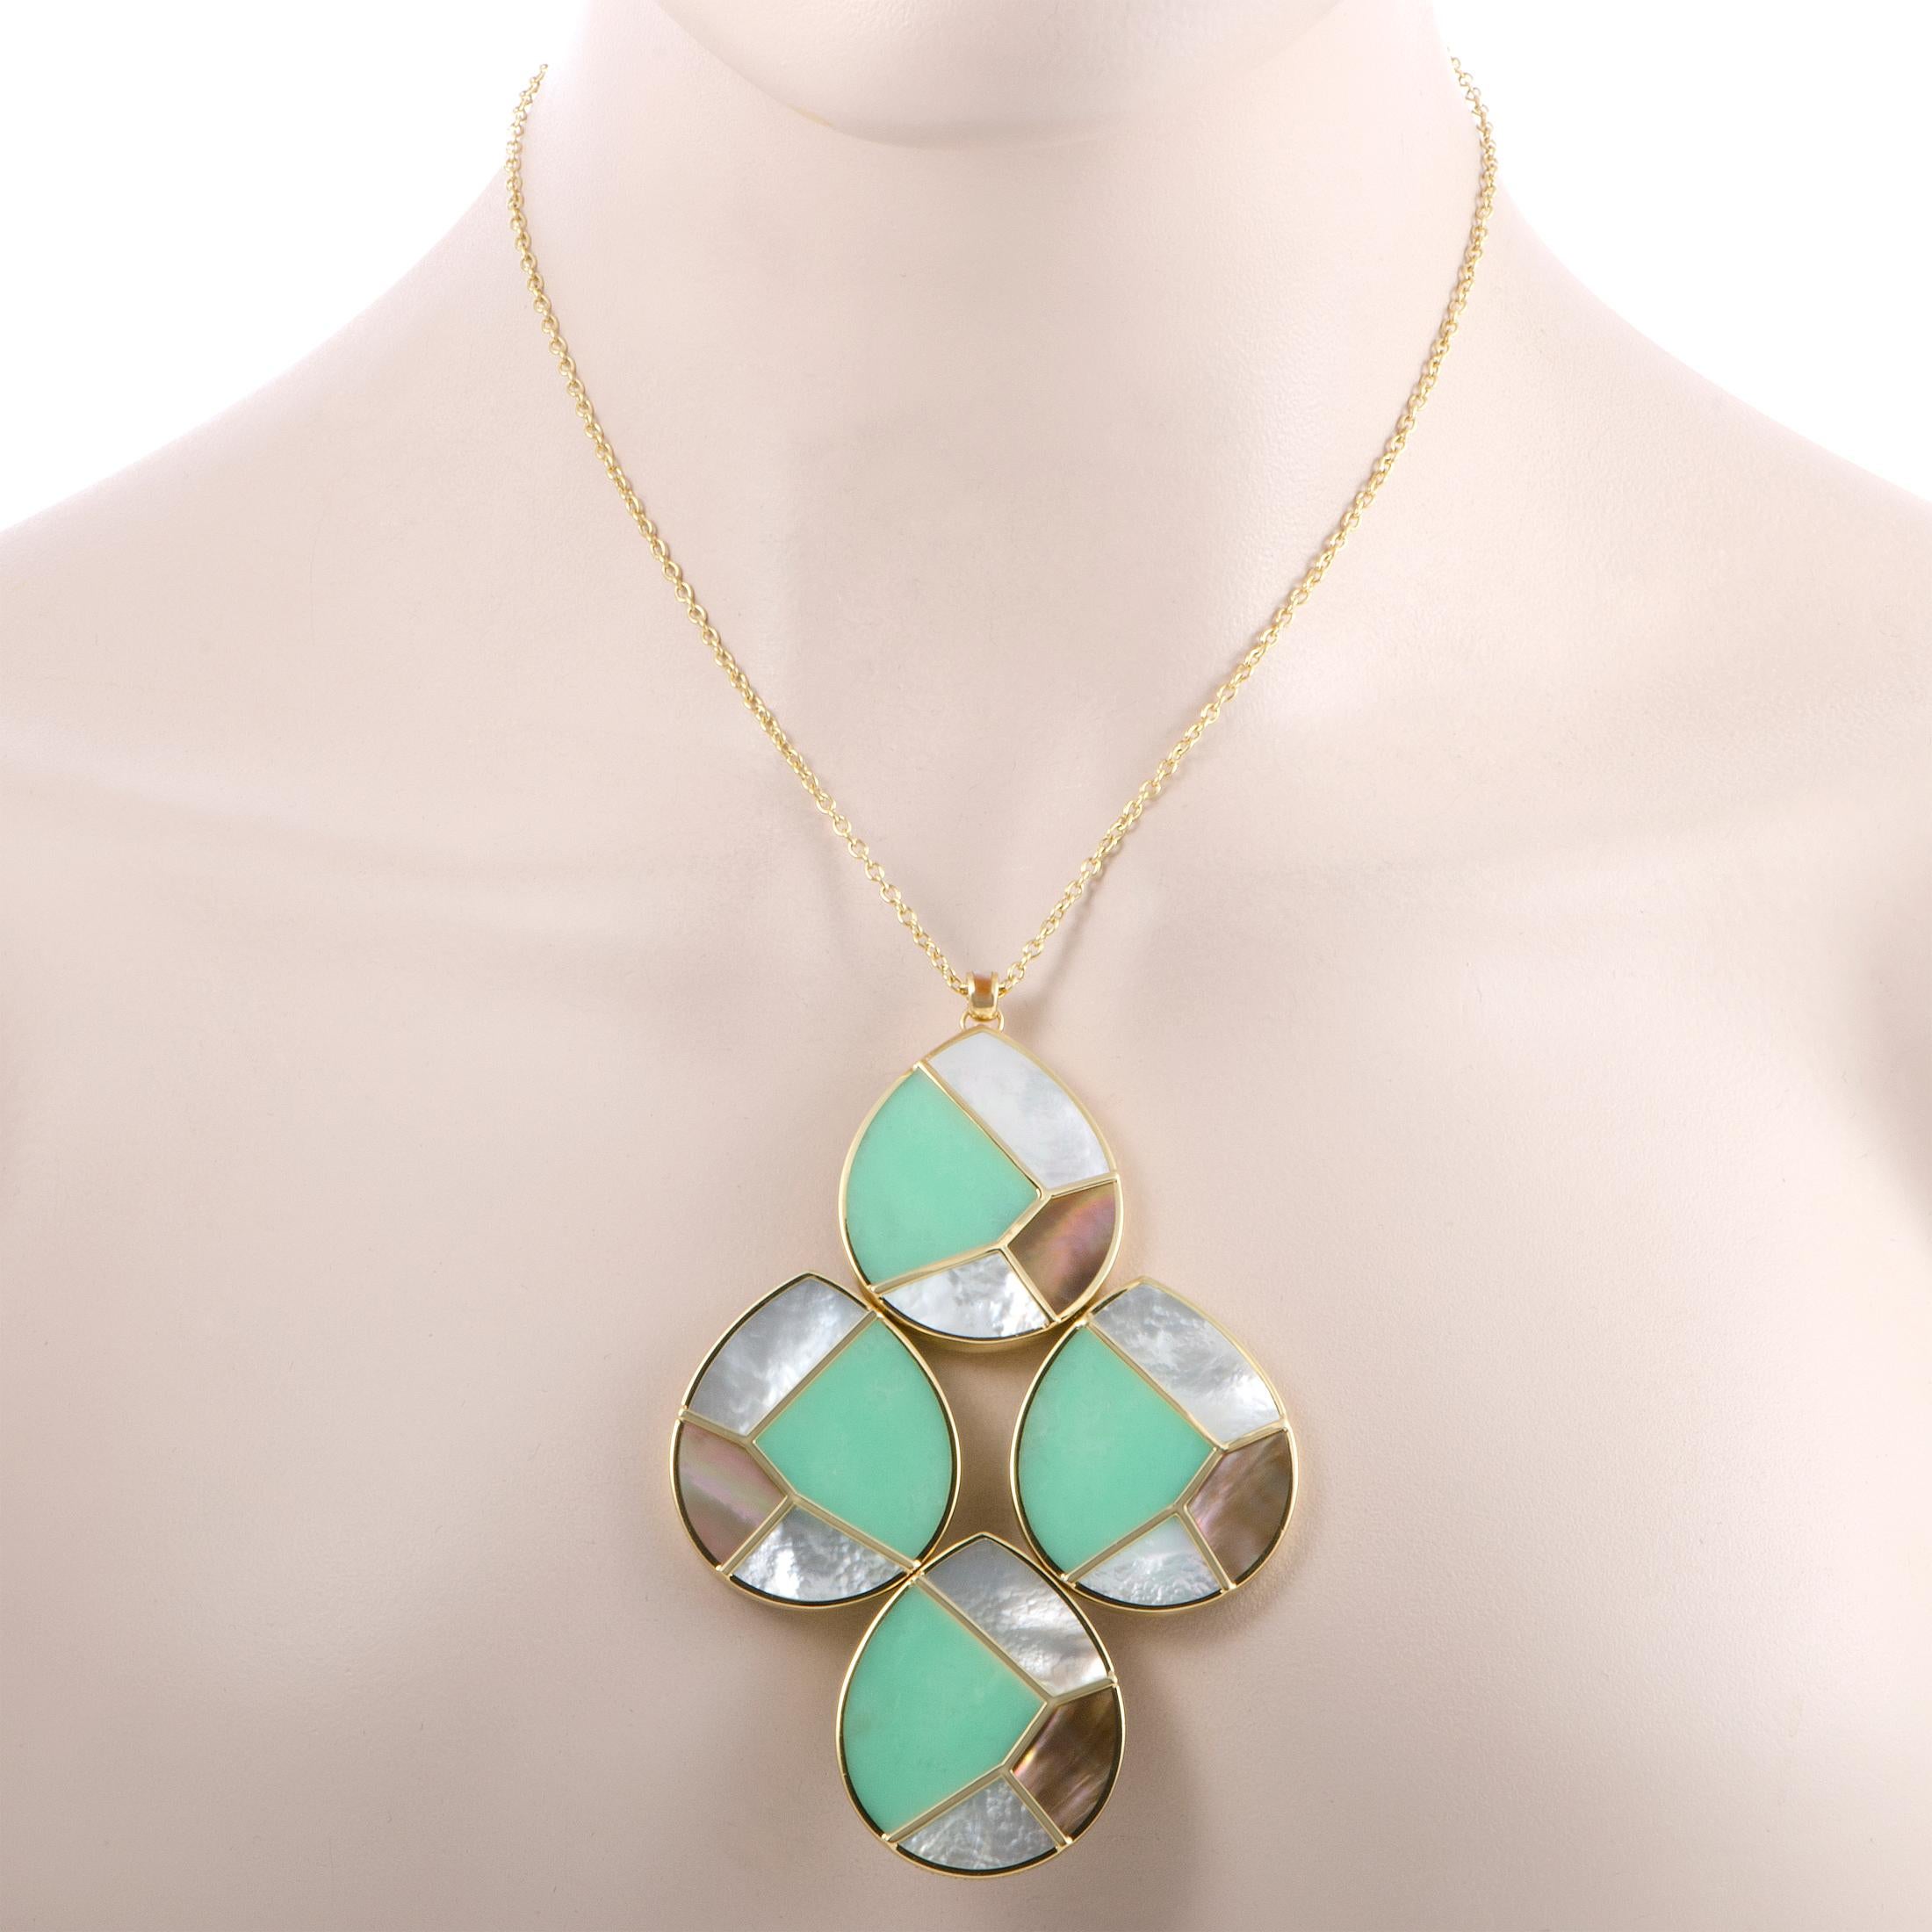 Boasting a pendant comprised of four teardrop segments, each set with delightfully nuanced gems in alluring mosaic-like fashion, this exquisite Ippolita necklace features nifty feminine appeal. It is made of gleaming 18K yellow gold and presented